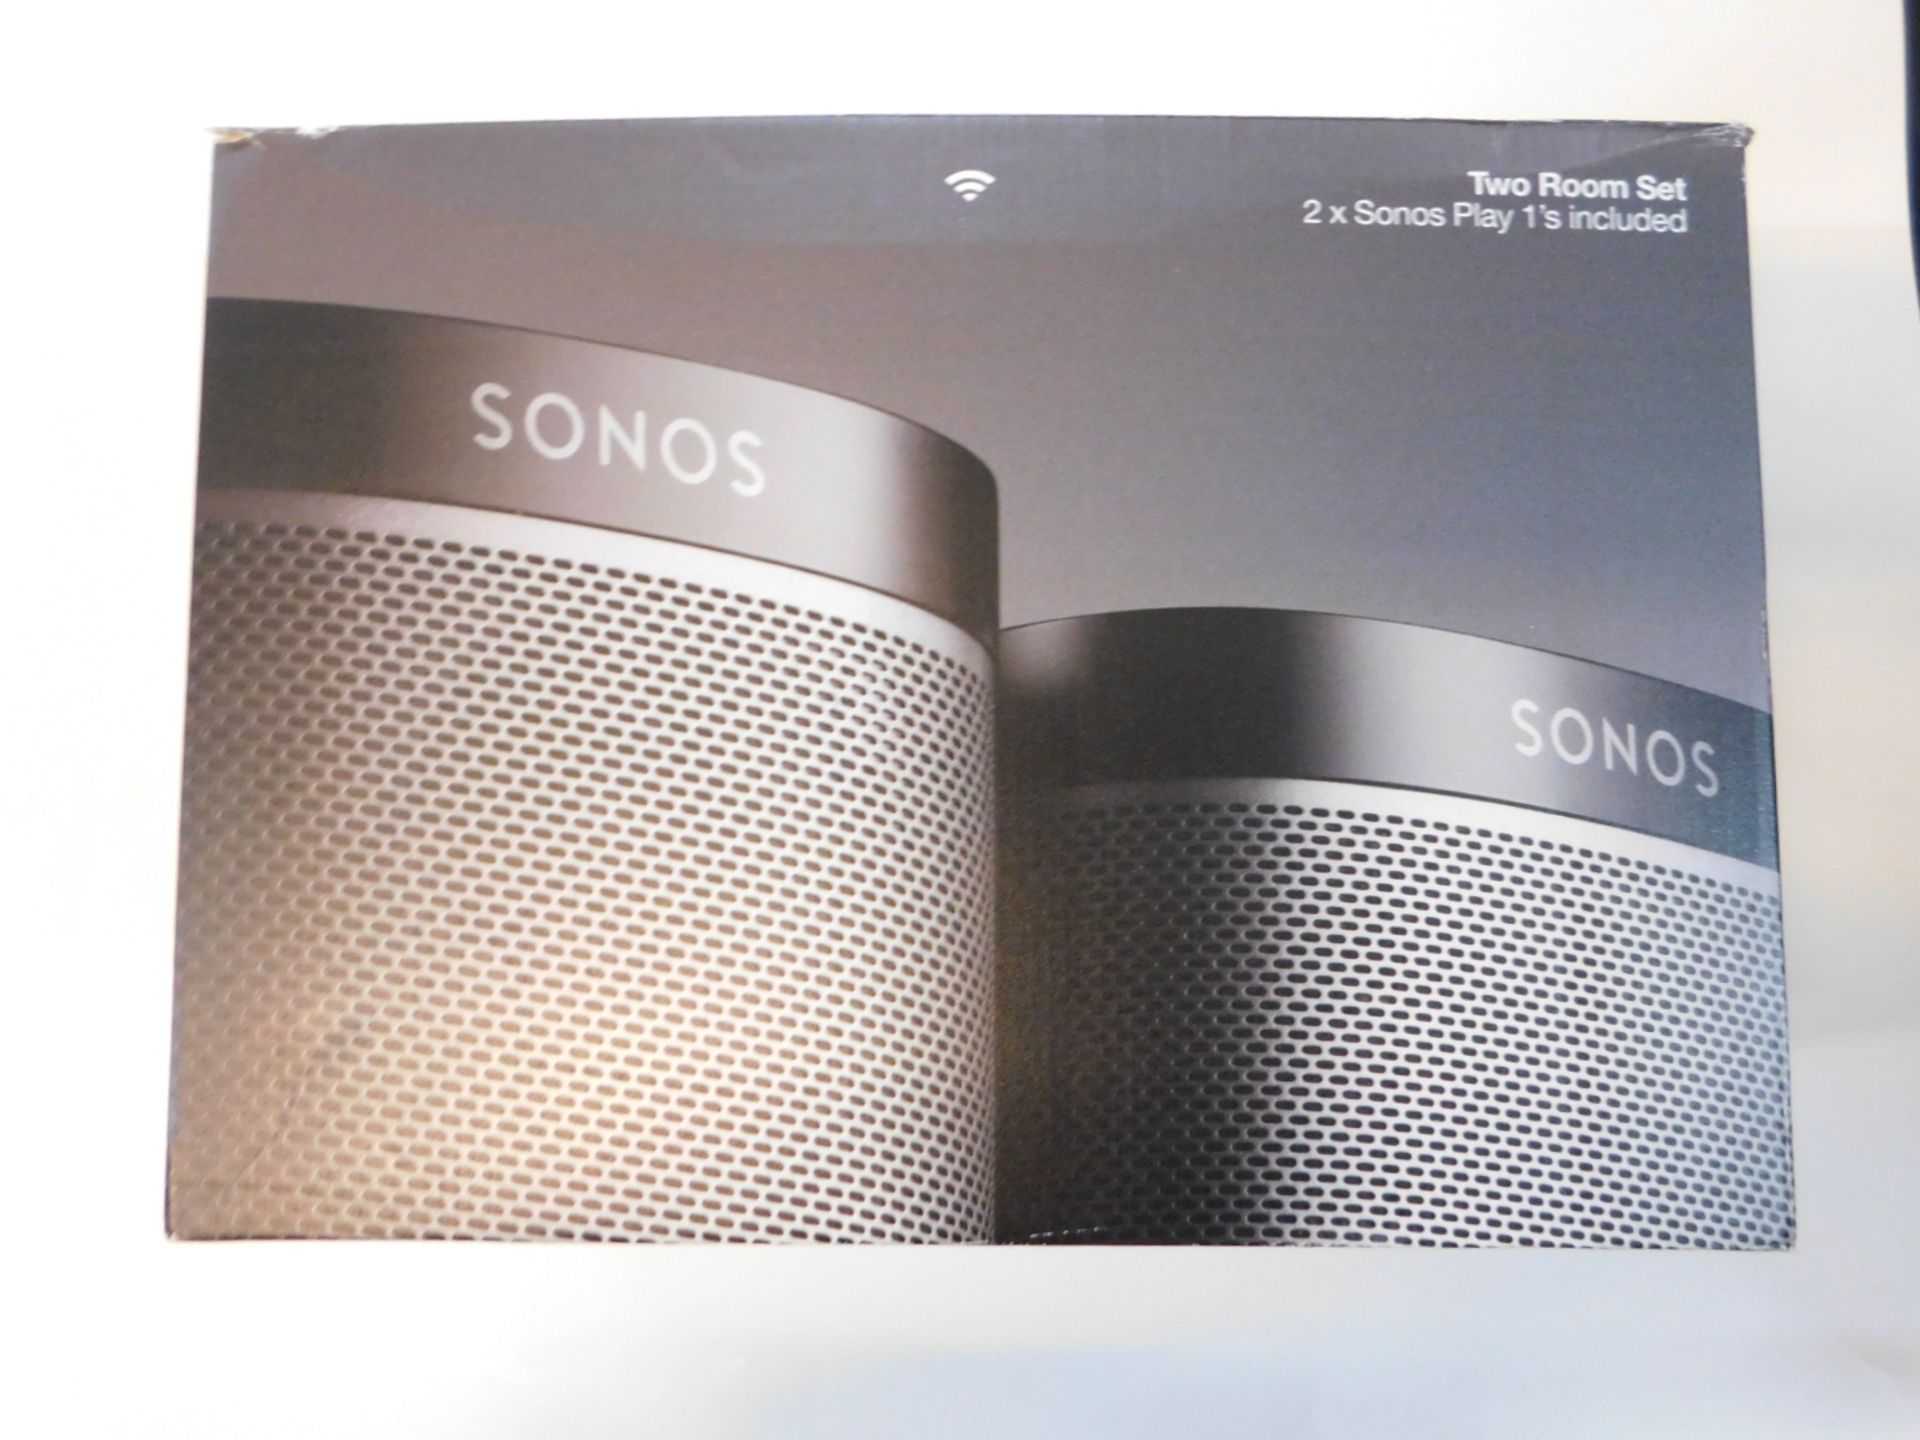 1 BOXED SONOS PLAY 1S TWO ROOM SET UP SPEAKER HOME CINEMA SURROUND SOUND SYSTEM RRP Â£349.99